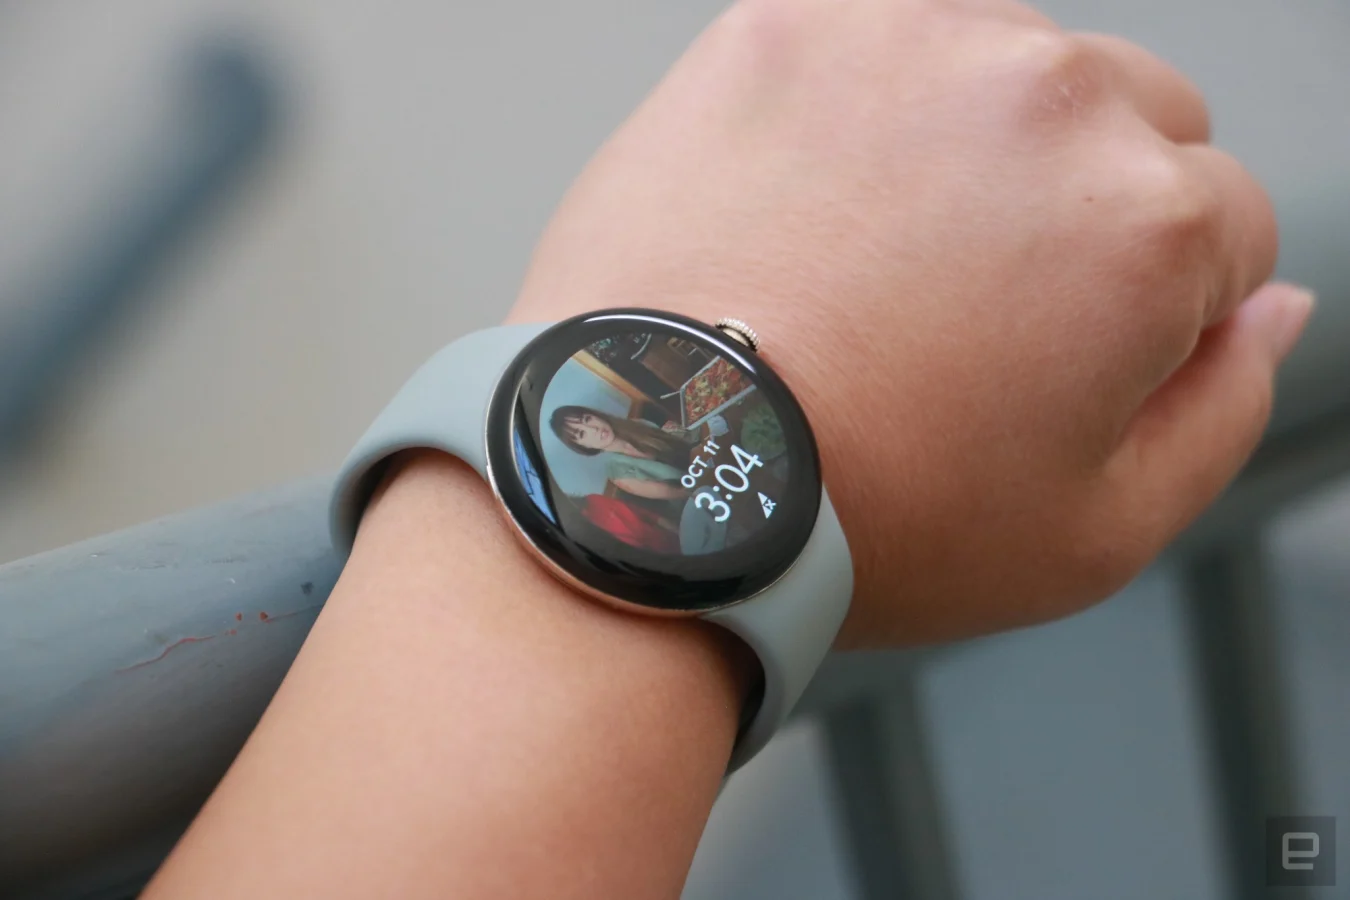 The Pixel Watch on a person's wrist with a photo as its background.